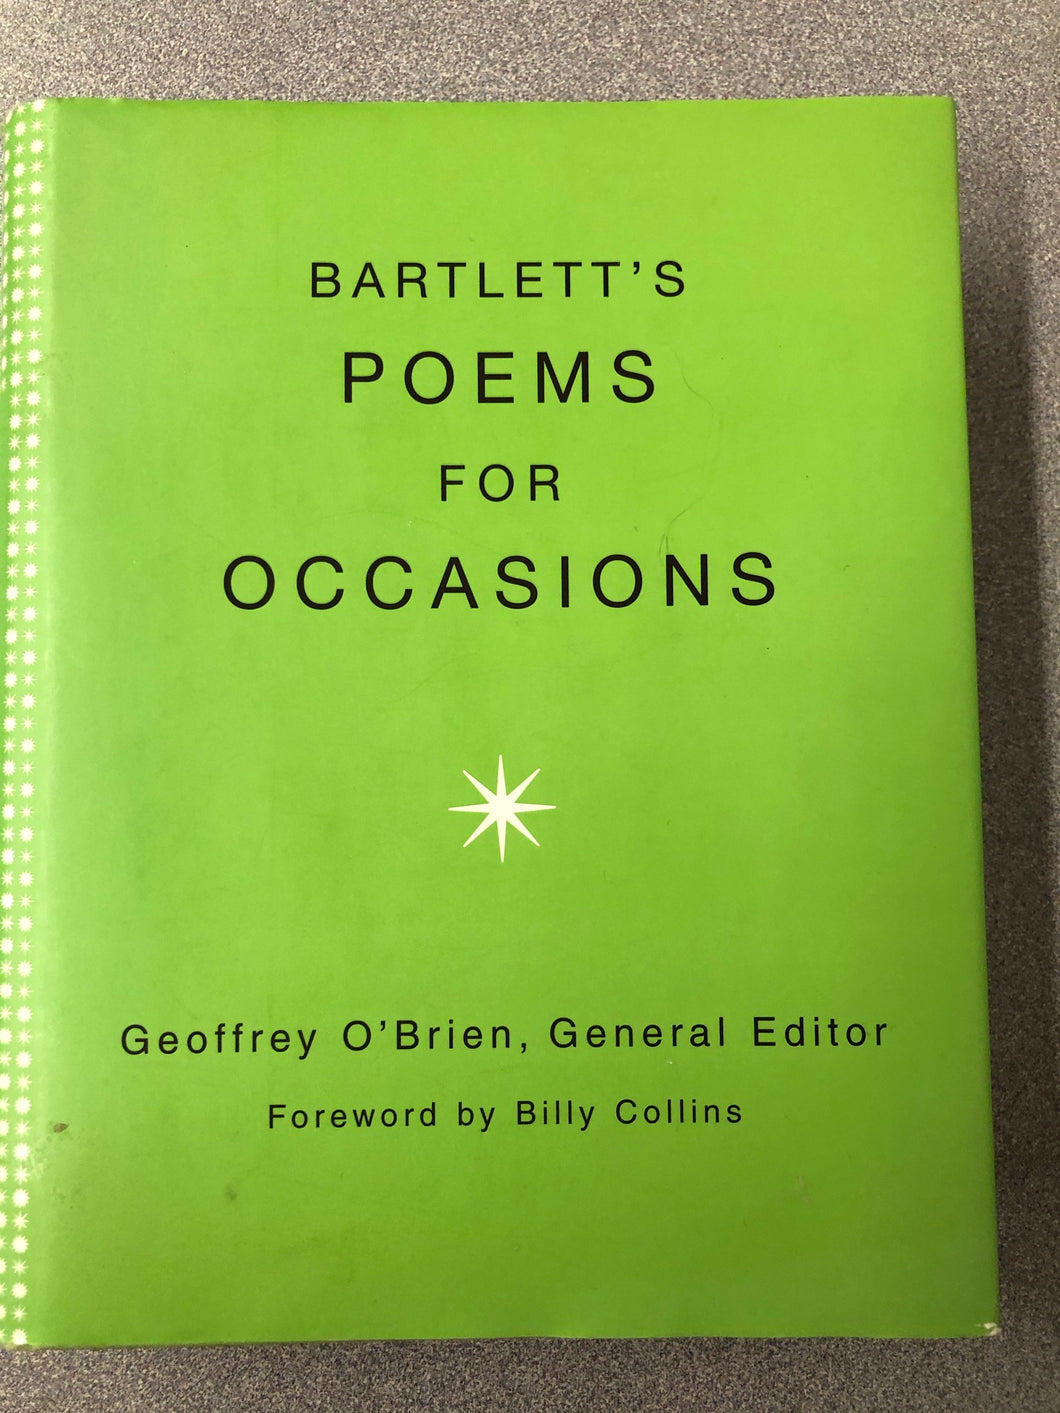 Bartlett's Poems for Occasions, O'Brien, Geoffrey, ed. [2004] P